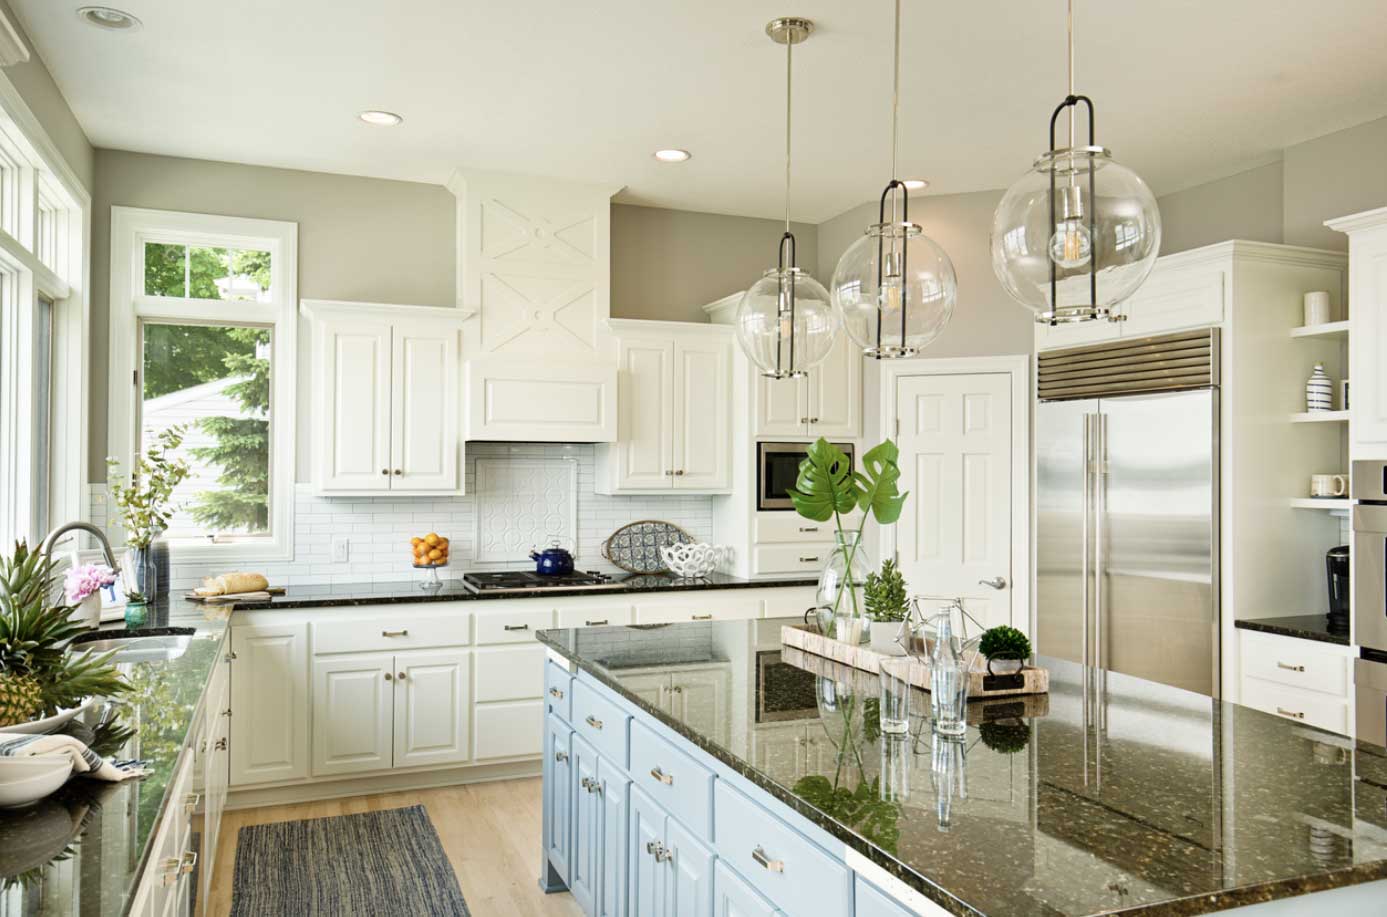 How to Prepare Your Kitchen Cabinets for Paint - Cabinet Now